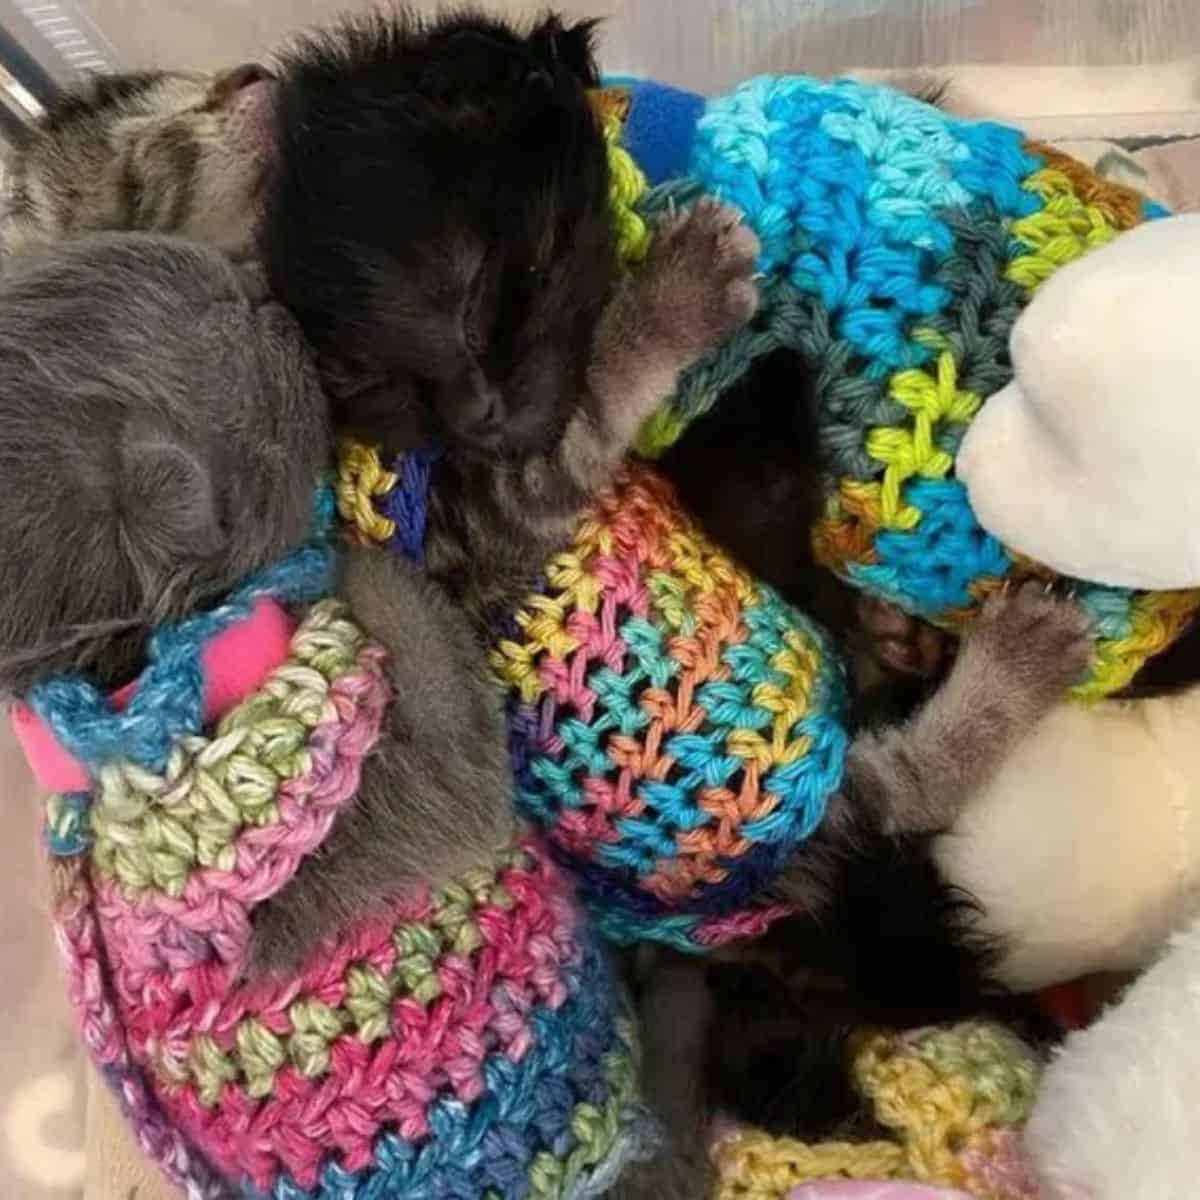 kittens dressed in knitted jumpers